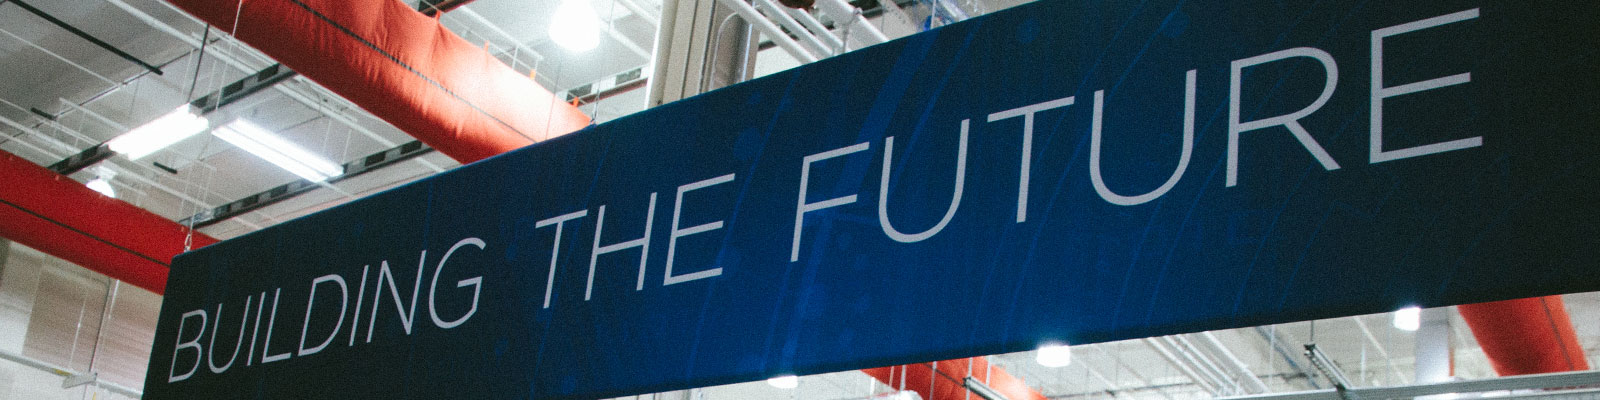 Building the Future sign in a manufacturing facility